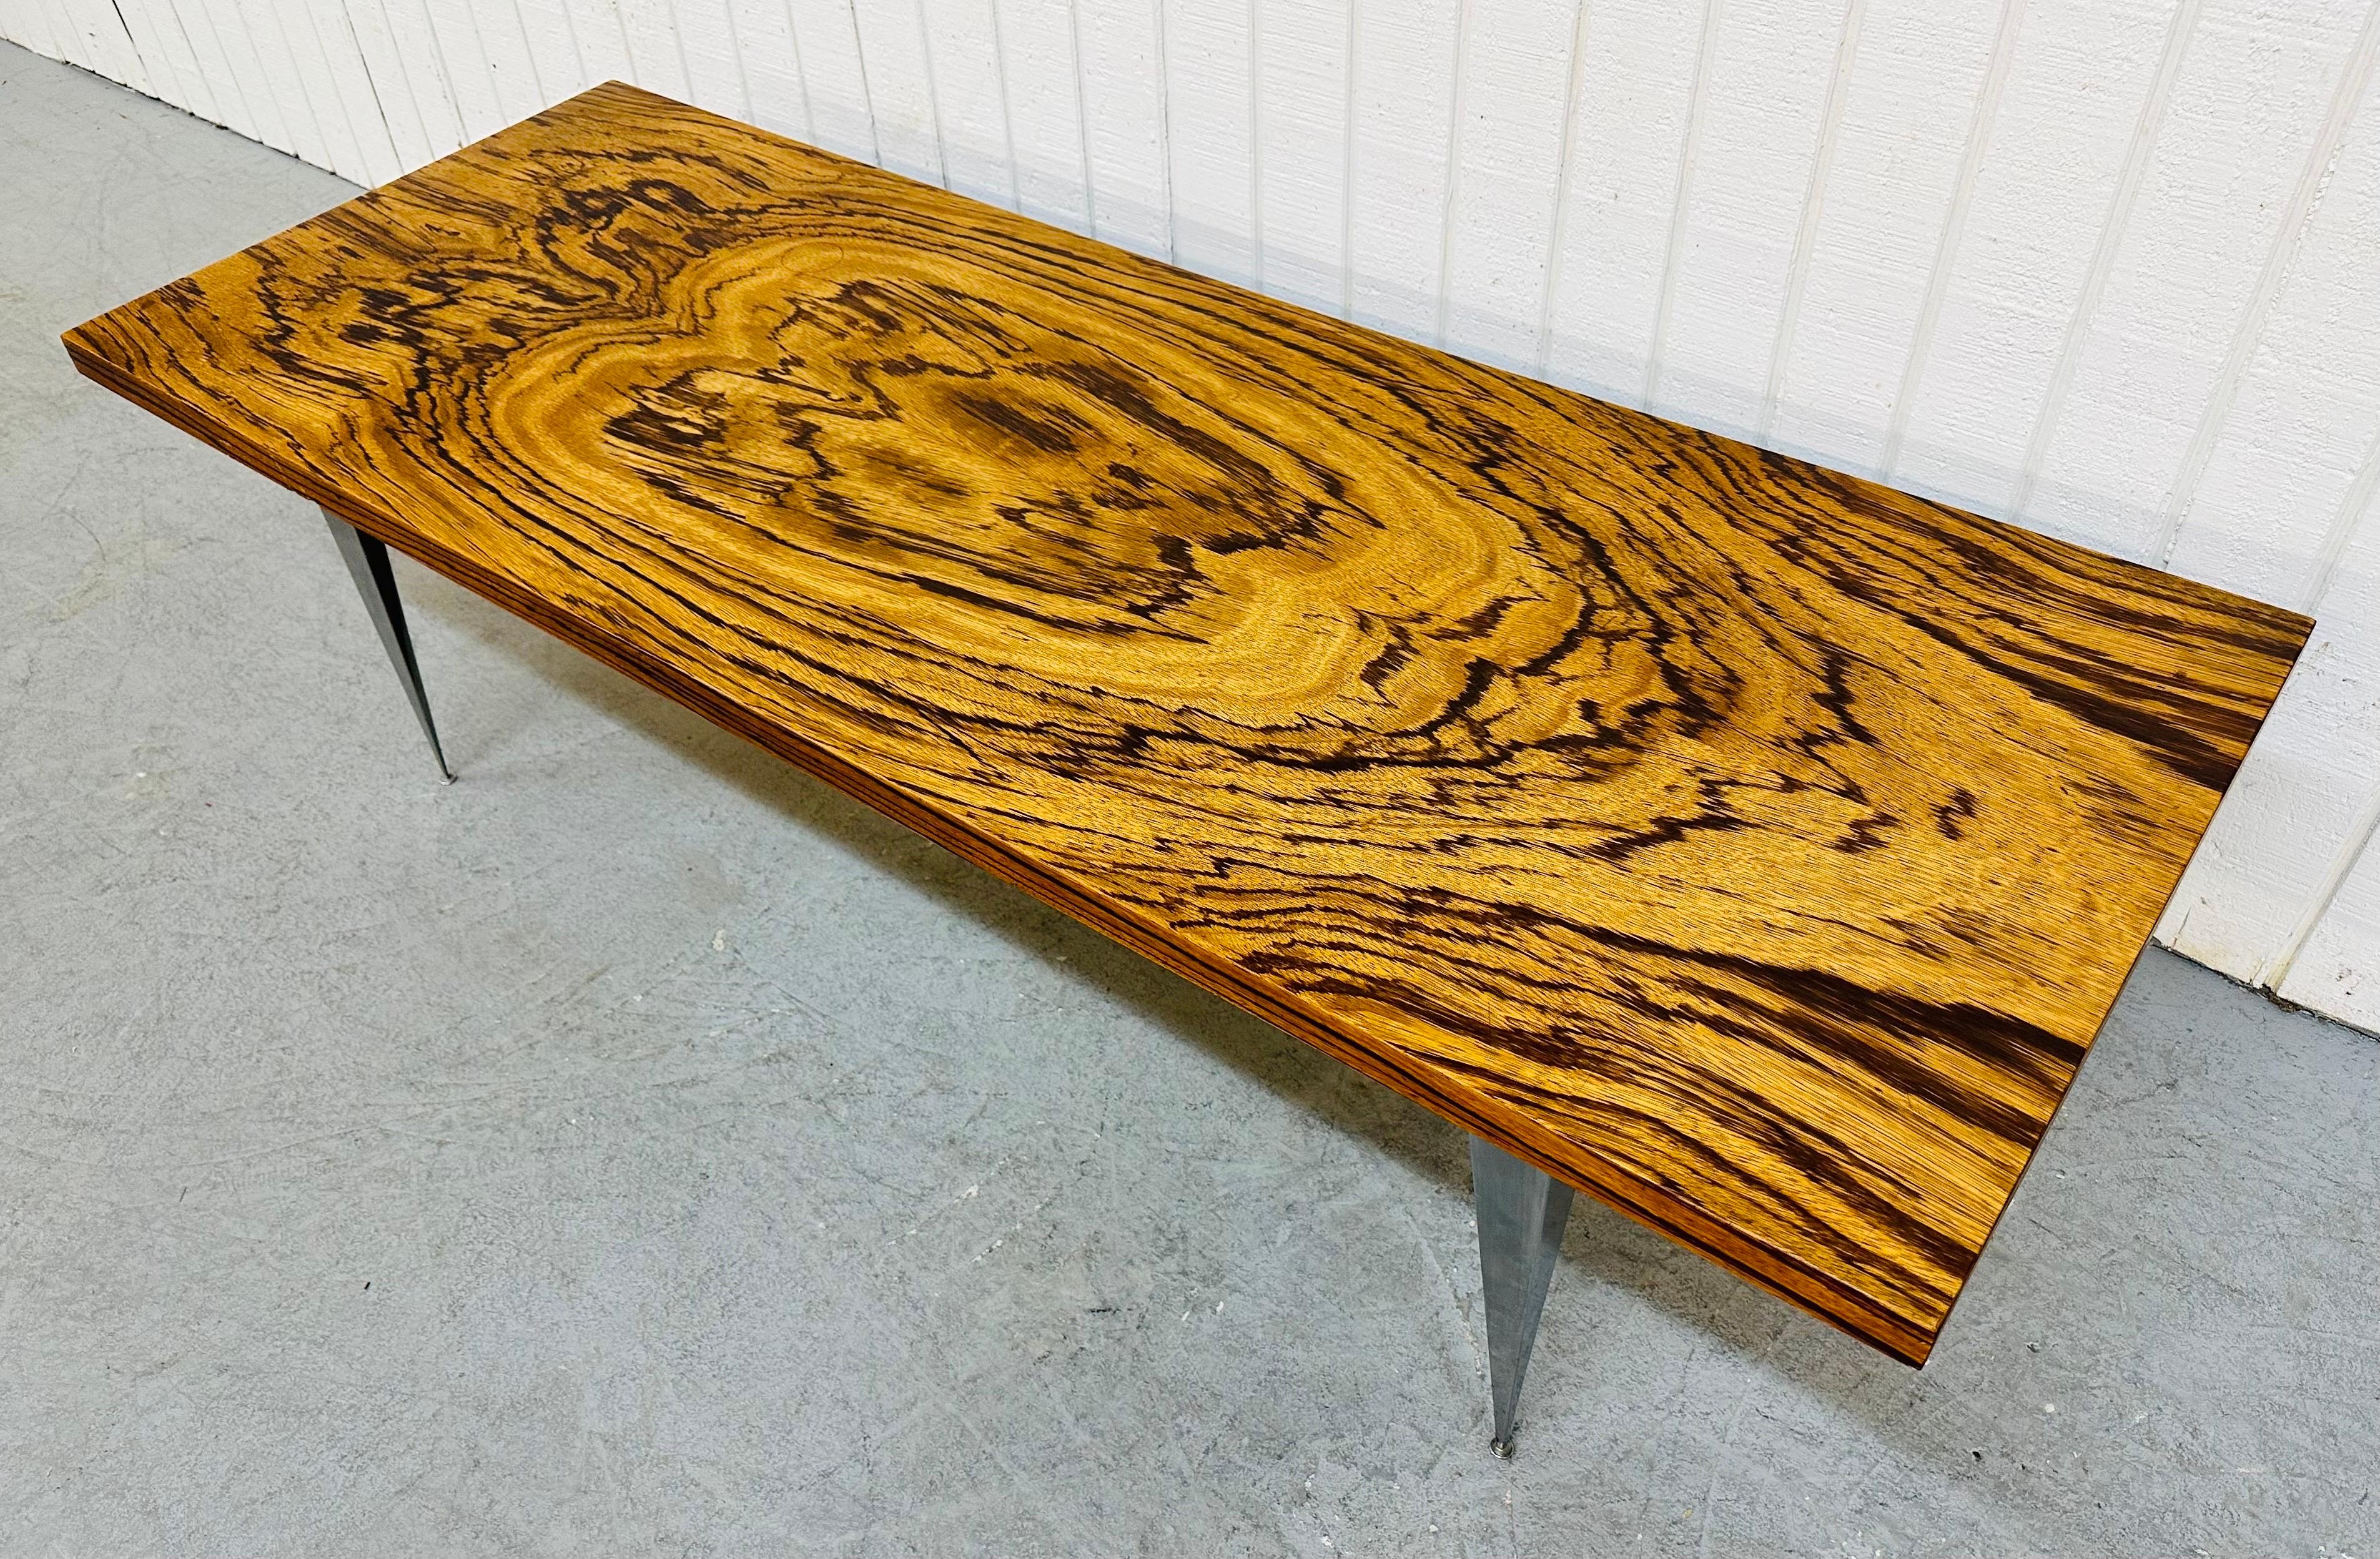 This listing is for a Vintage Modern Rosewood coffee table. Featuring a rectangular rosewood top and four chrome angular legs.